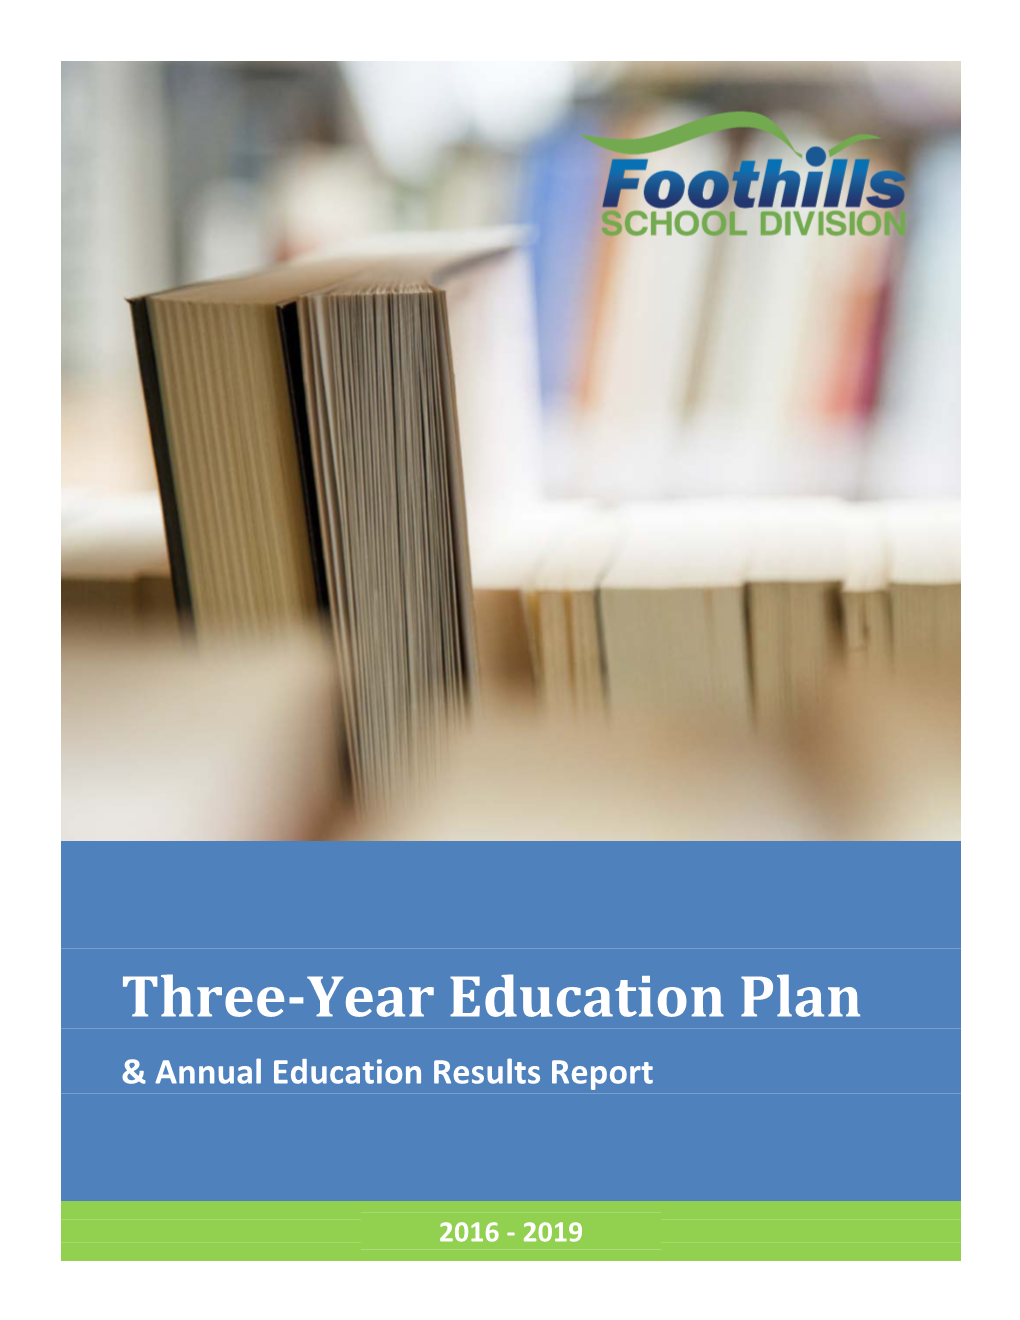 Three-Year Education Plan & Annual Education Results Report